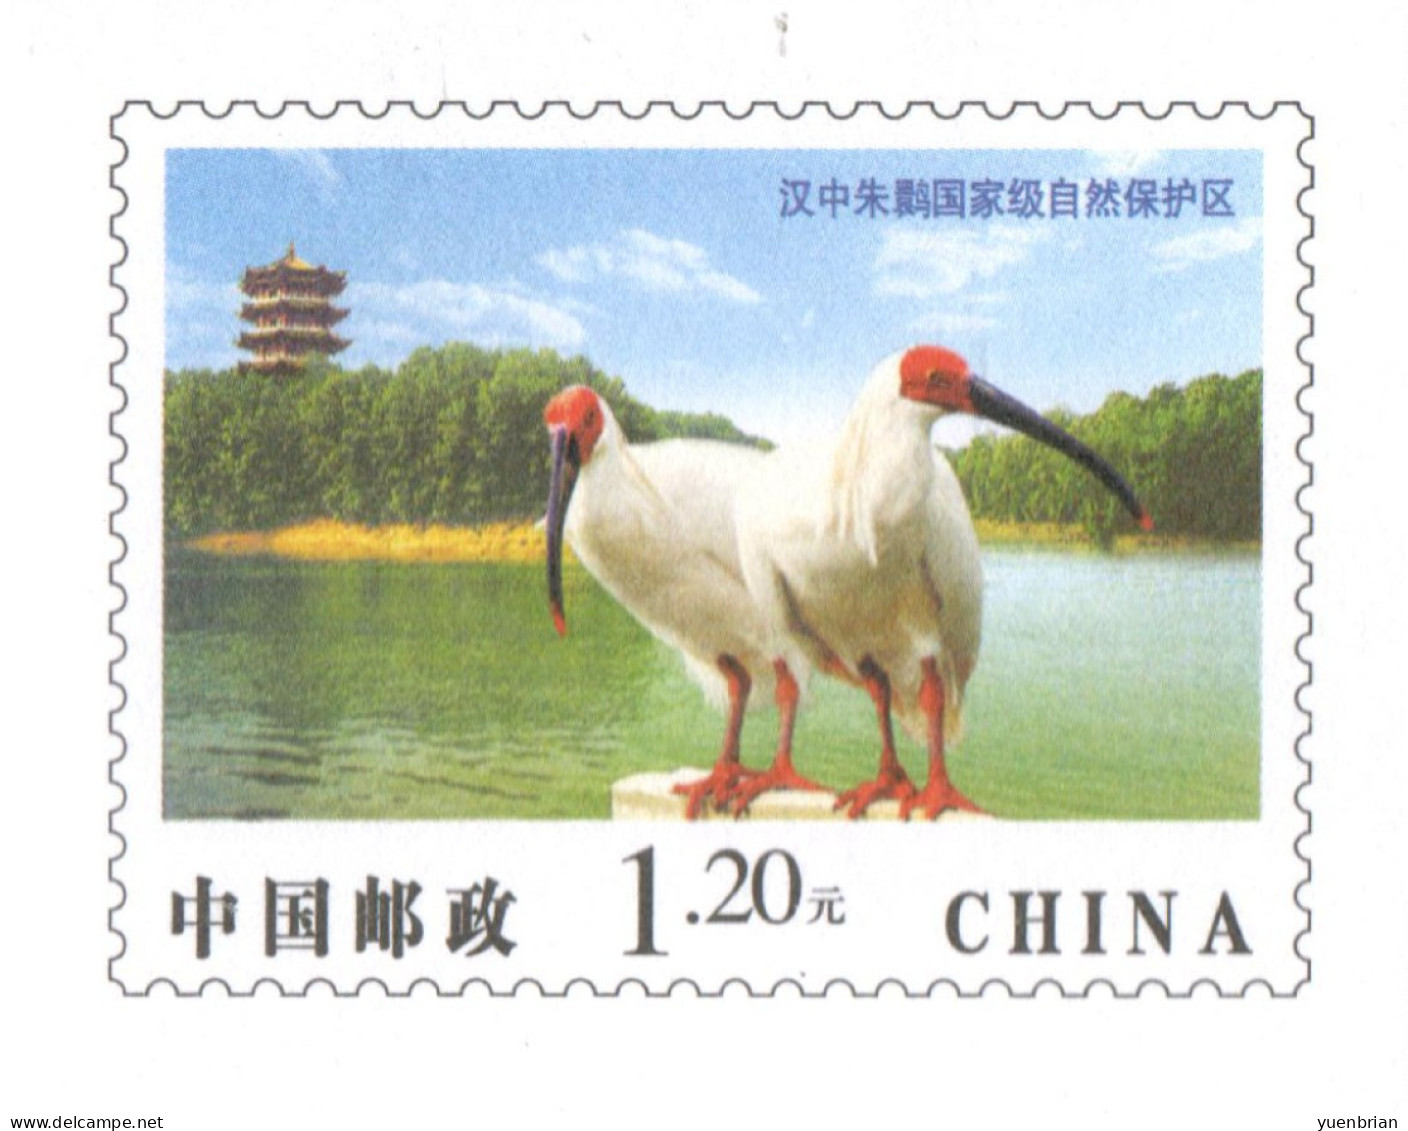 China 2009, Postal Stationary, Pre-Stamped Cover $1.20, Crane, MNH** - Aves Gruiformes (Grullas)